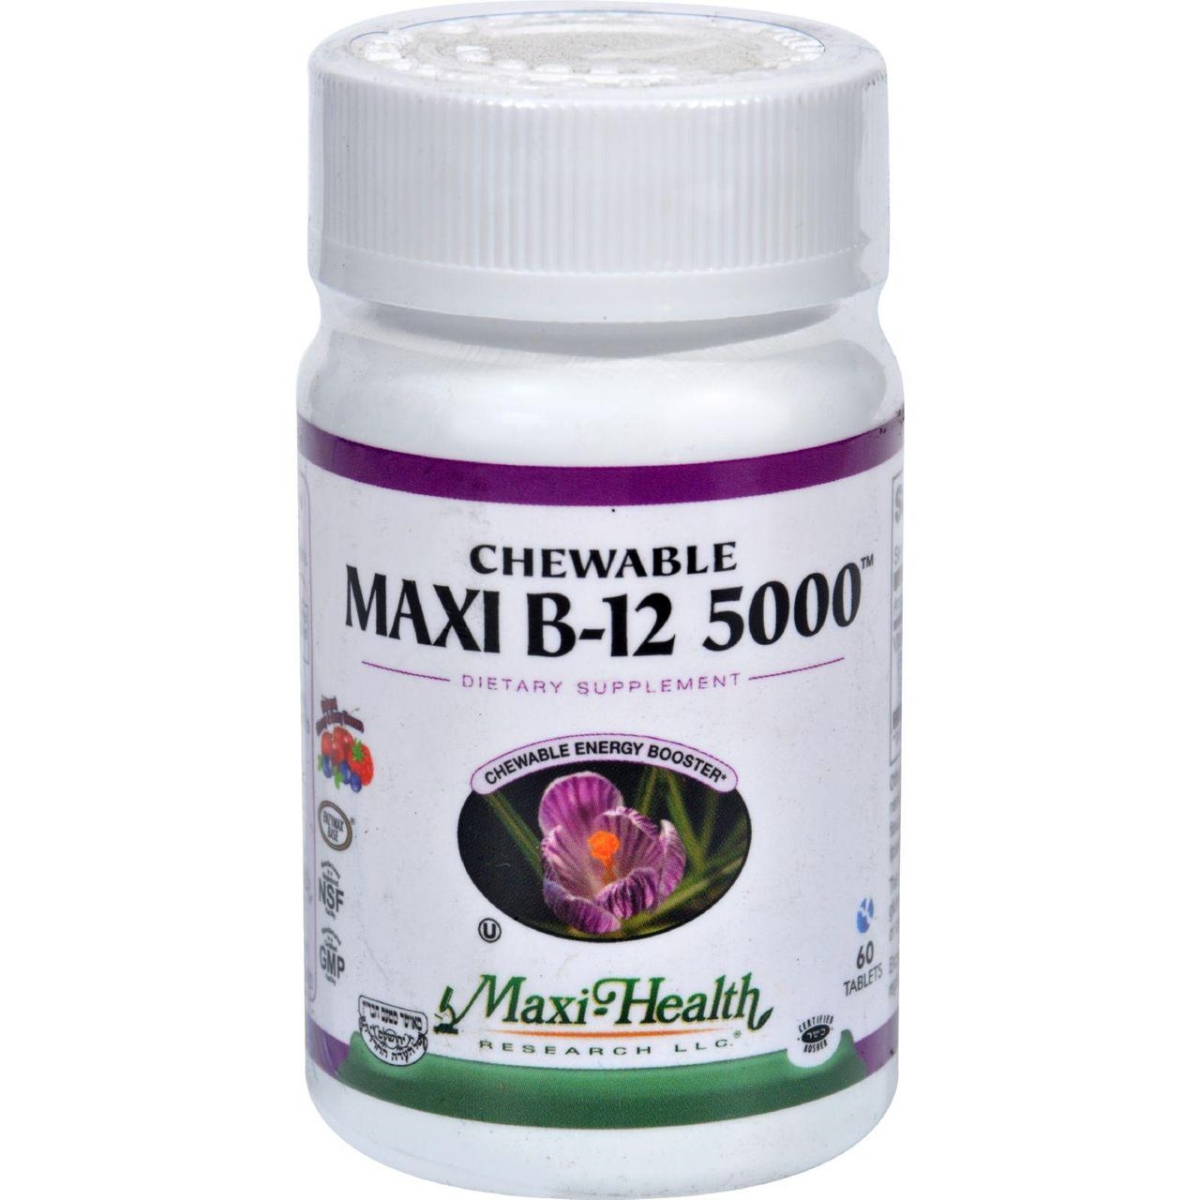 Hg1510924 Maxi B12 5000 - Chewable - 60 Tablets